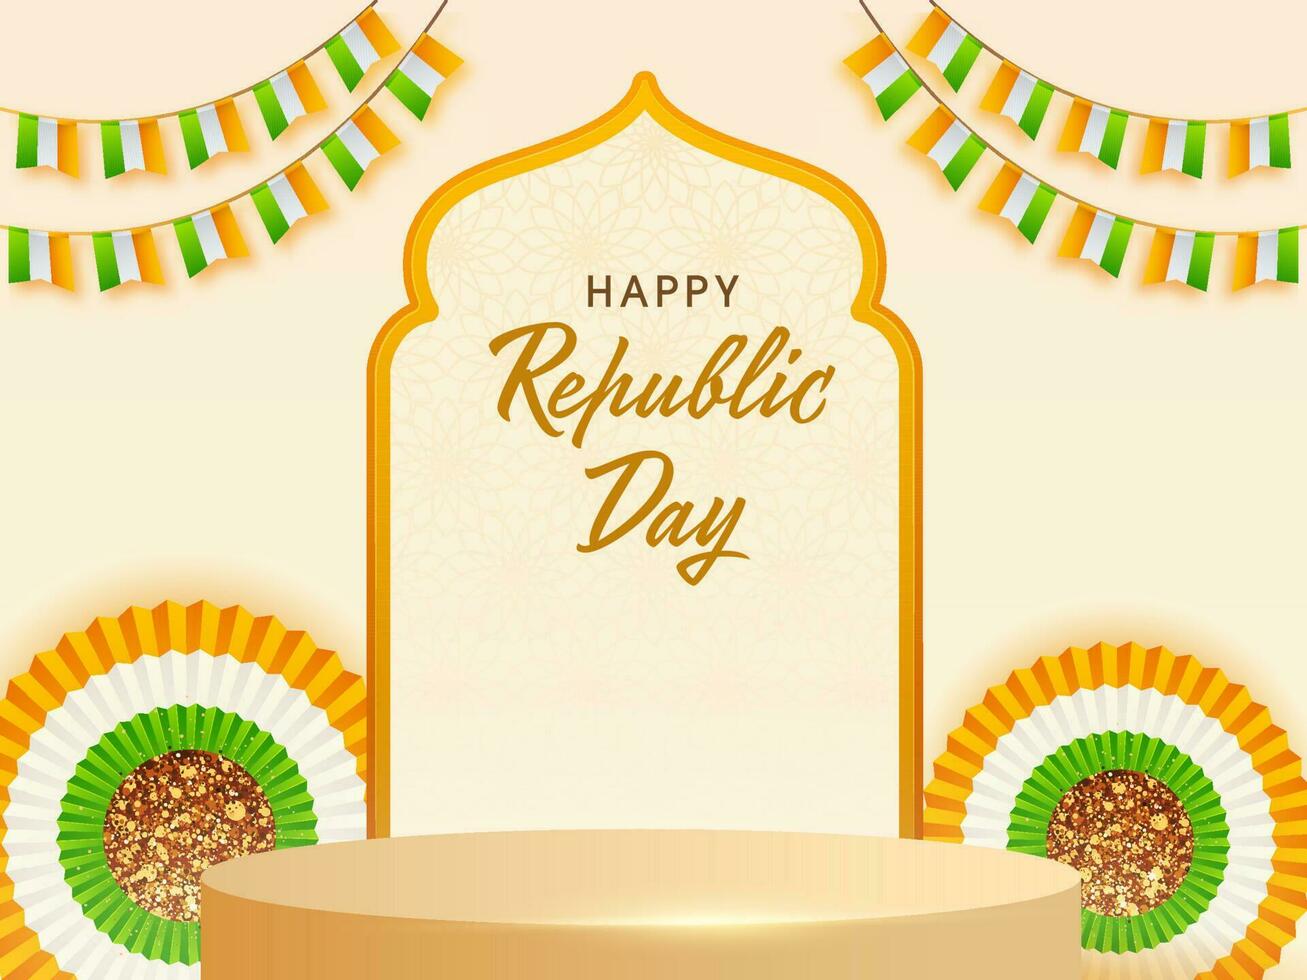 Happy Republic Day Font With Tricolor Paper Flower Or Badge, 3D Empty Stage And Bunting Flags On Cosmic Latte Background. vector